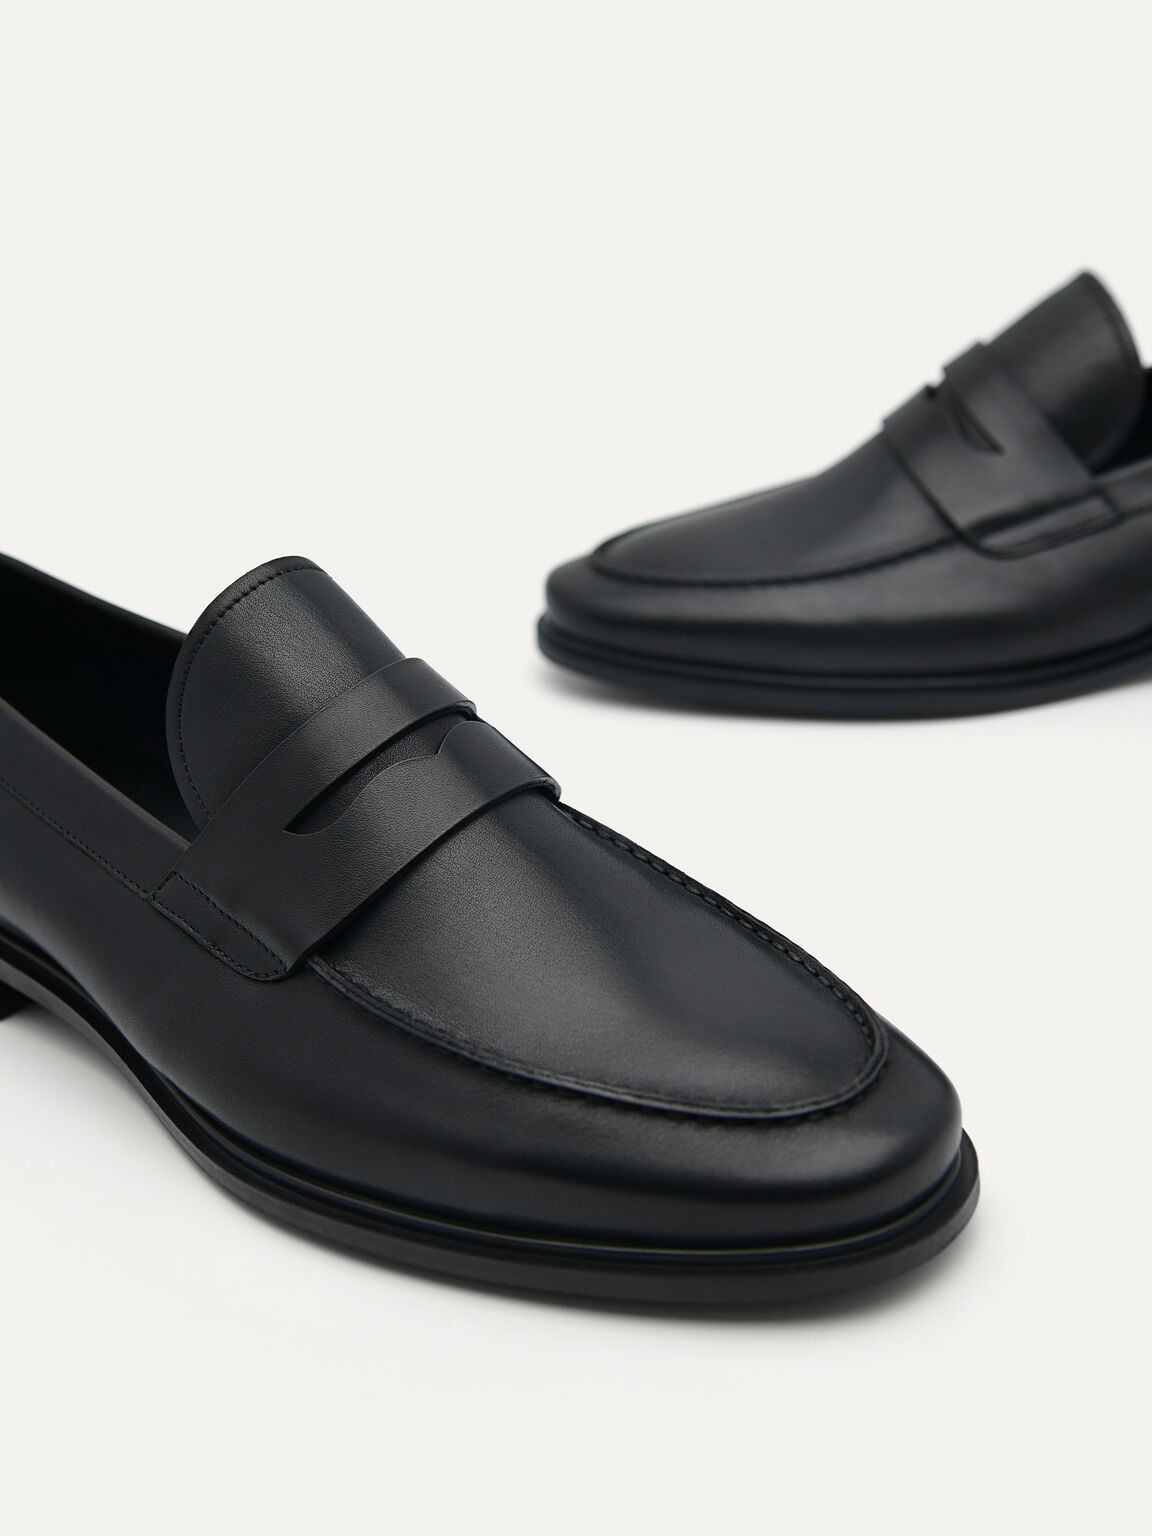 Black Bailey Calf Leather Loafers - PEDRO SG